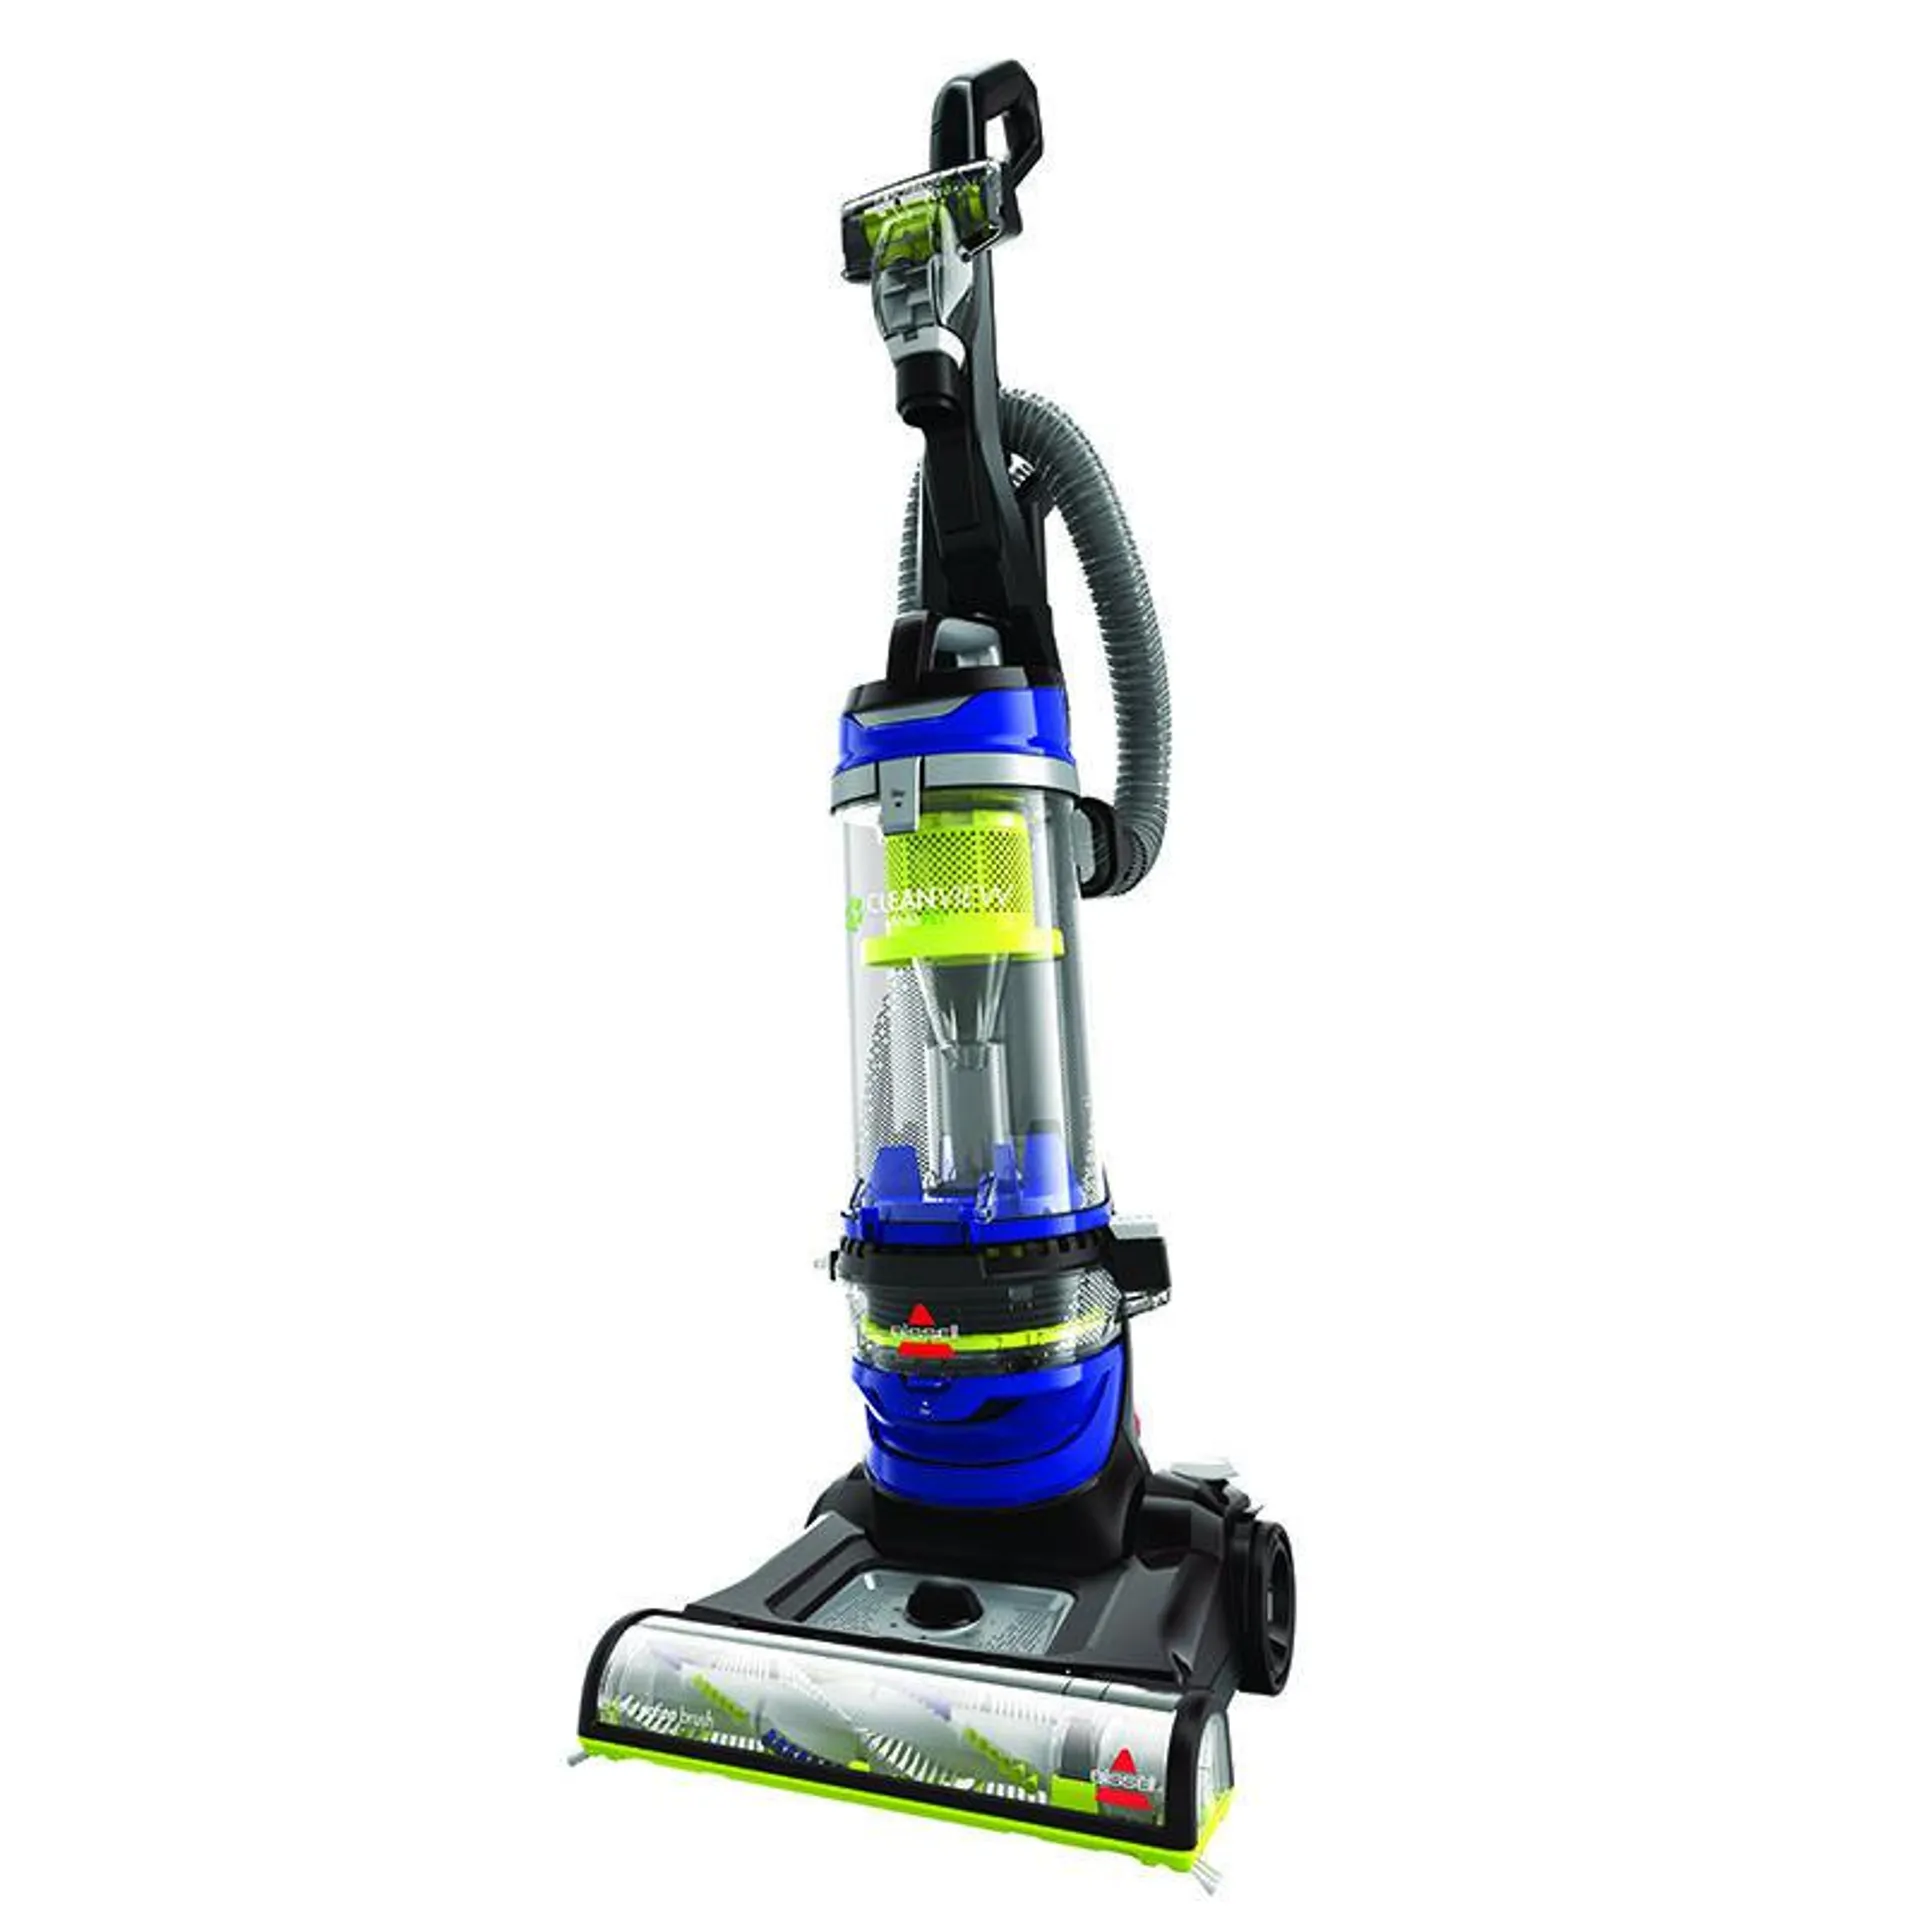 Bissell CleanView Light-Weight Bagless Pet Upright Vacuum with 3 Multi-Use Tools and Rewind Retractable Cord